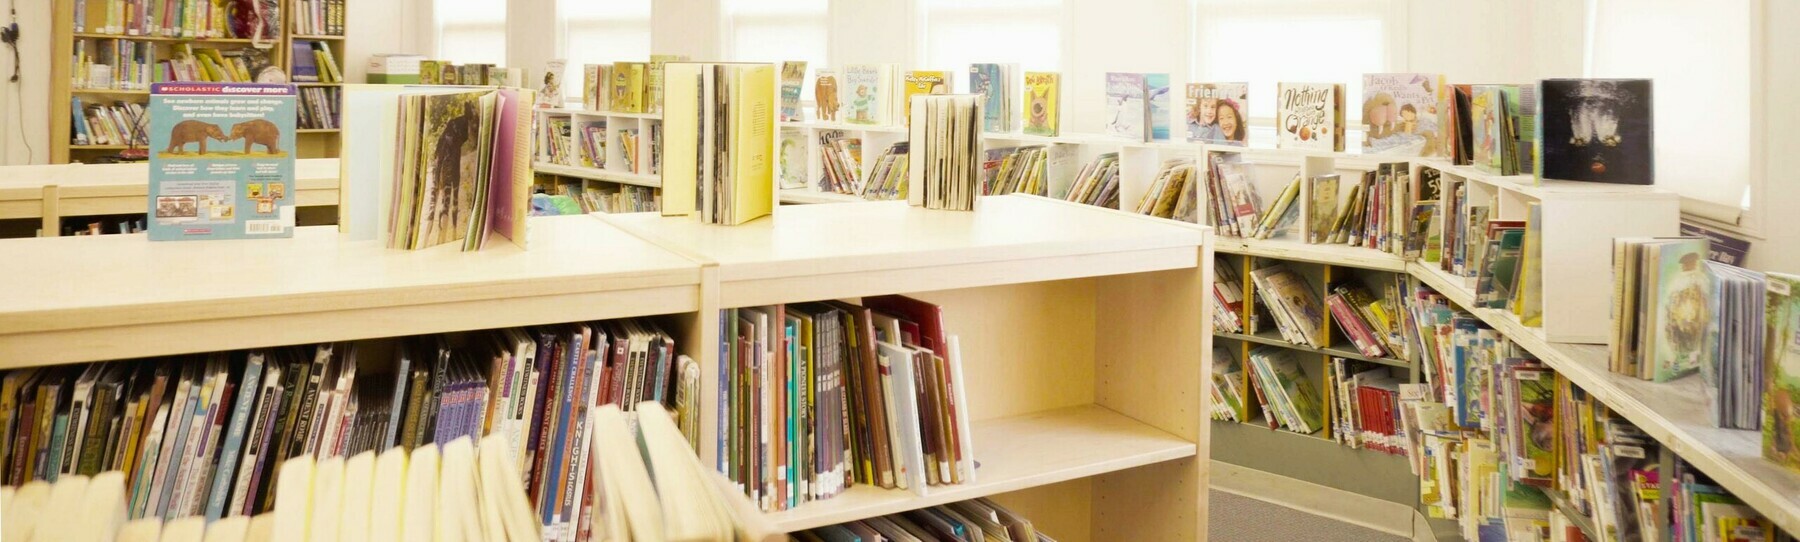 books on shelves at ICES